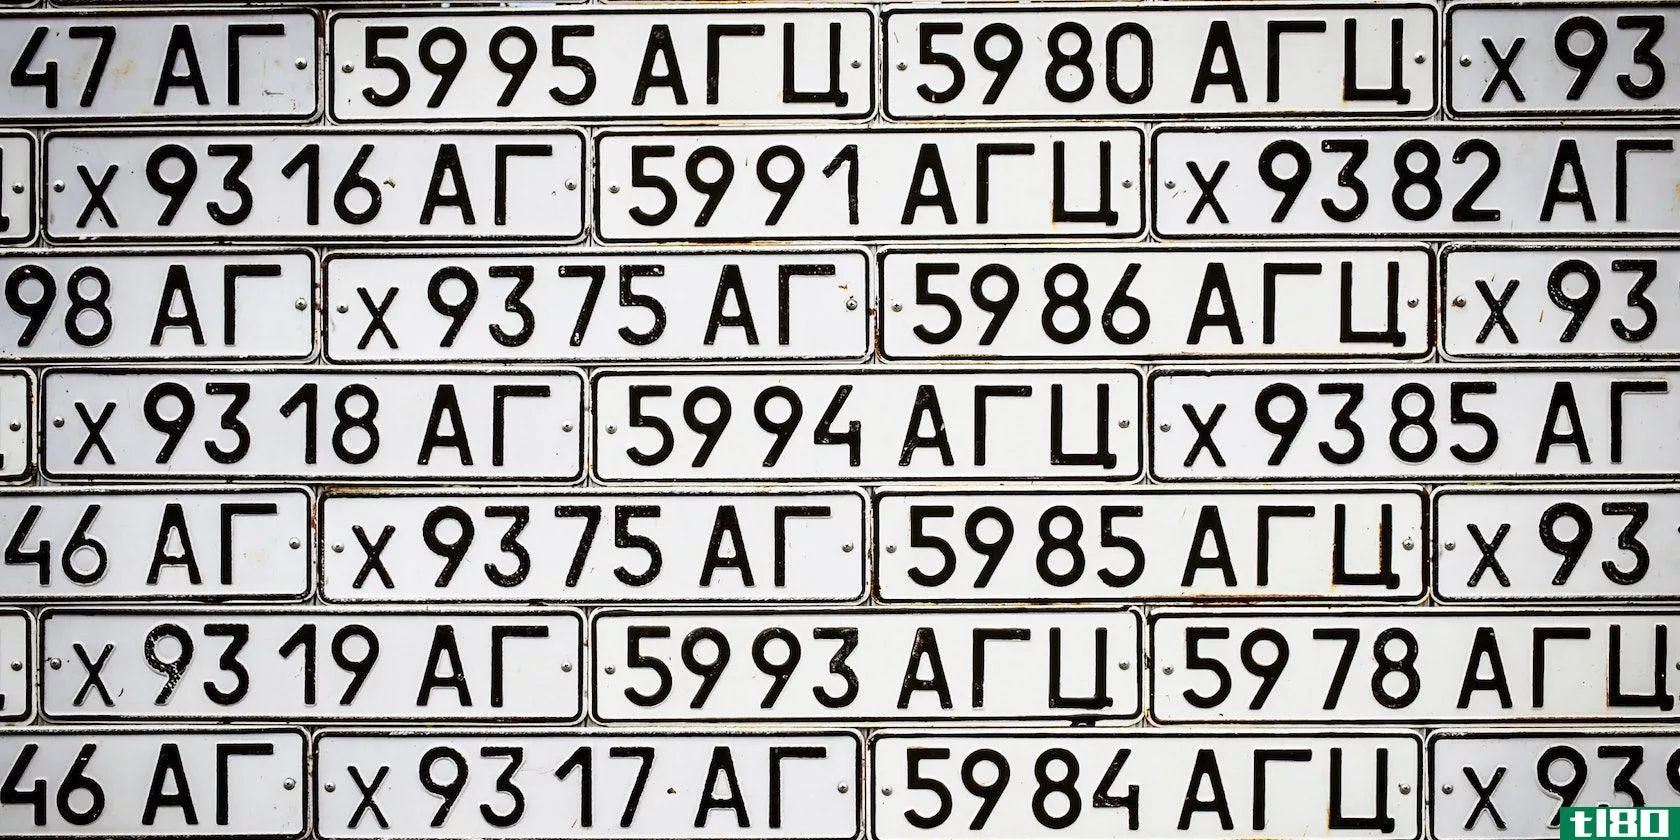 A set of registration plates with various numbers, letters, and other symbols